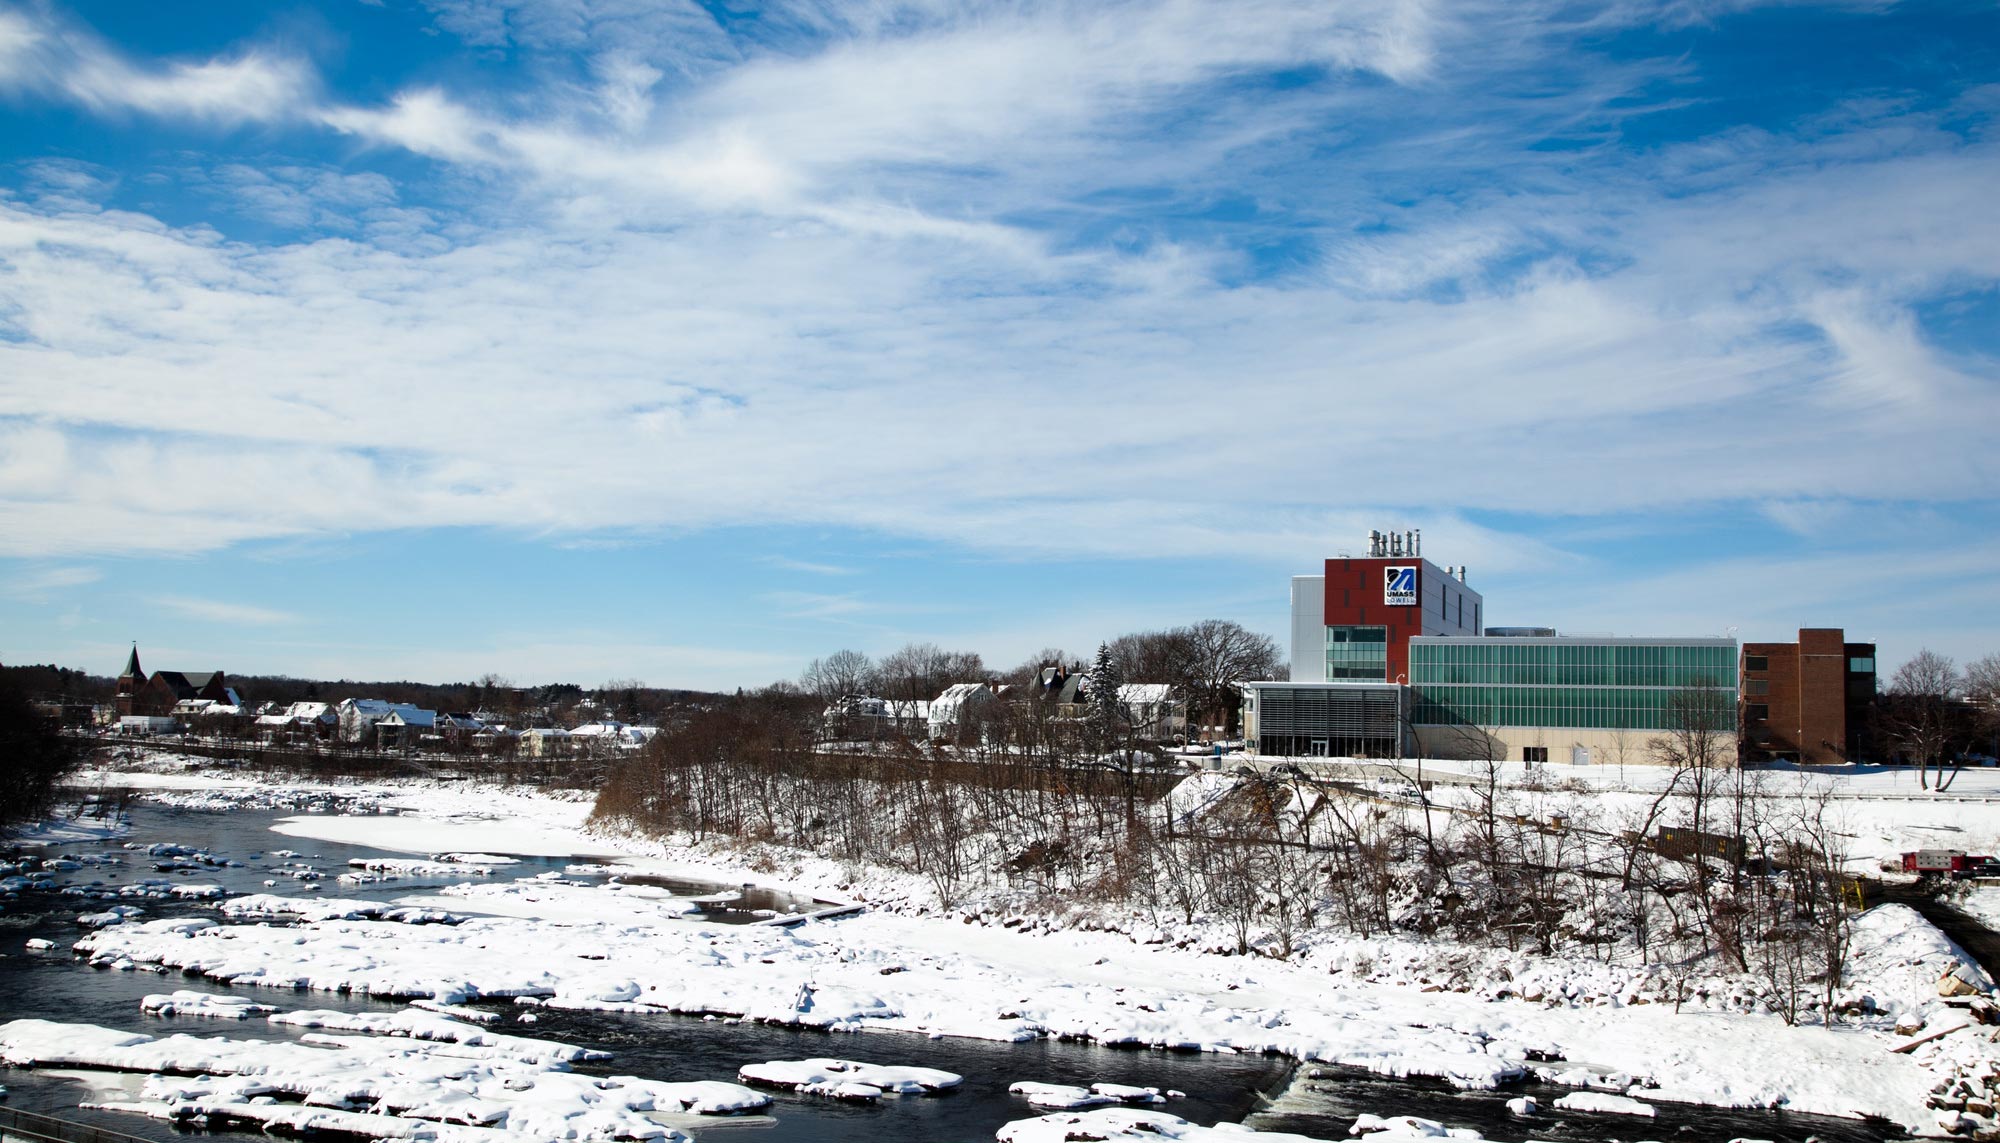 View of the Saab Emerging Technology & Innovation Center across the Merrimack River on a snowy day.